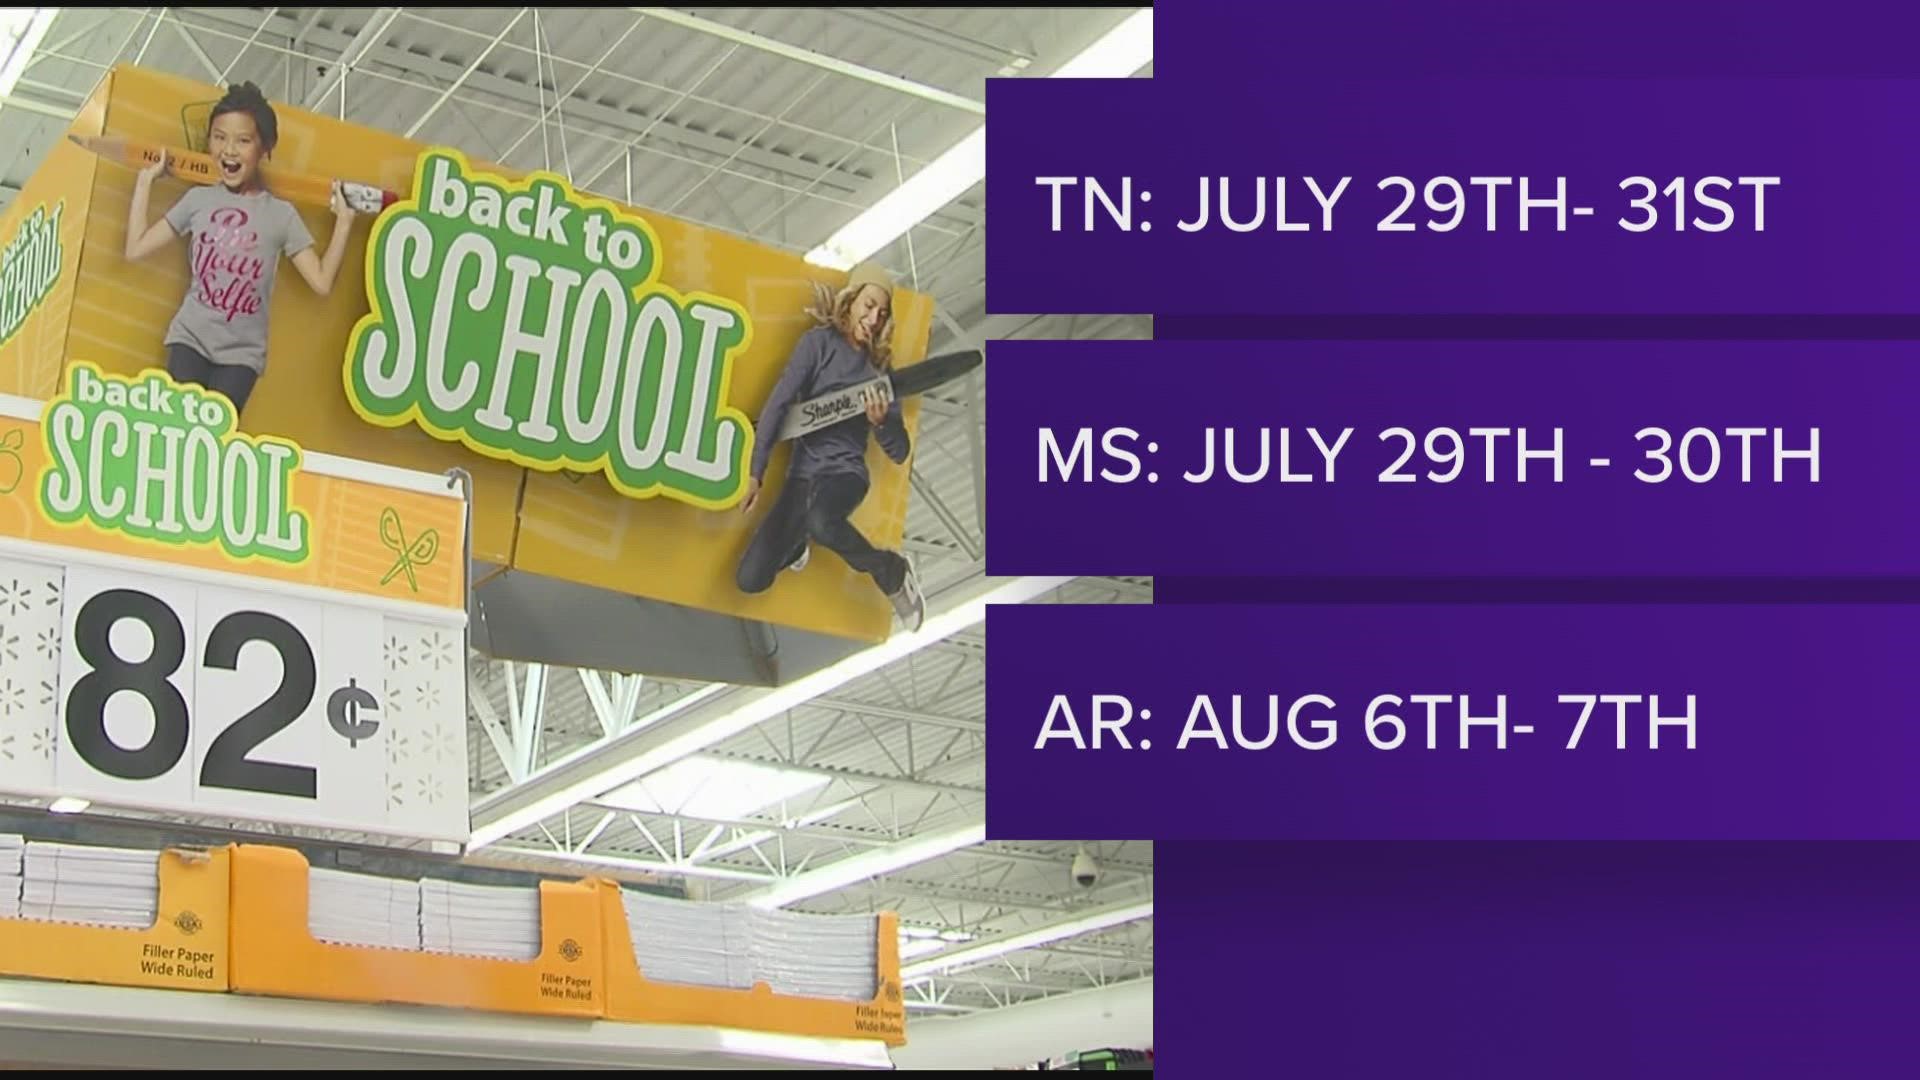 Tennesseans will be able to save on clothes, school supplies and computers starting at midnight on July 29 and ending at midnight July 31.